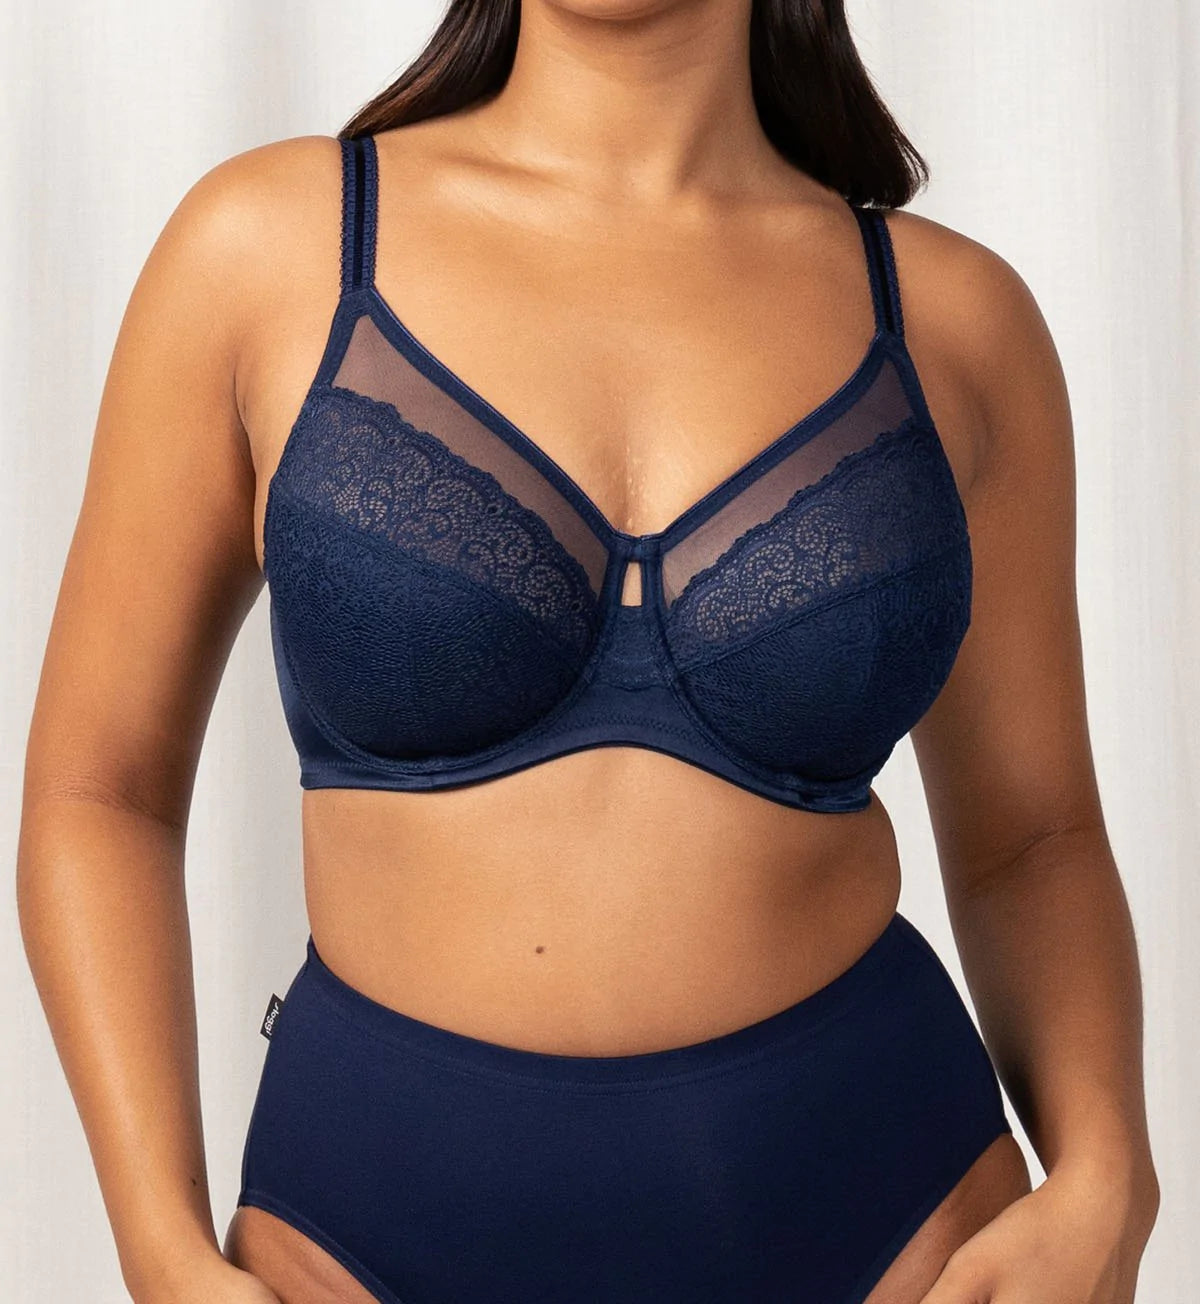 Sheer Lace Bras China Trade,Buy China Direct From Sheer Lace Bras